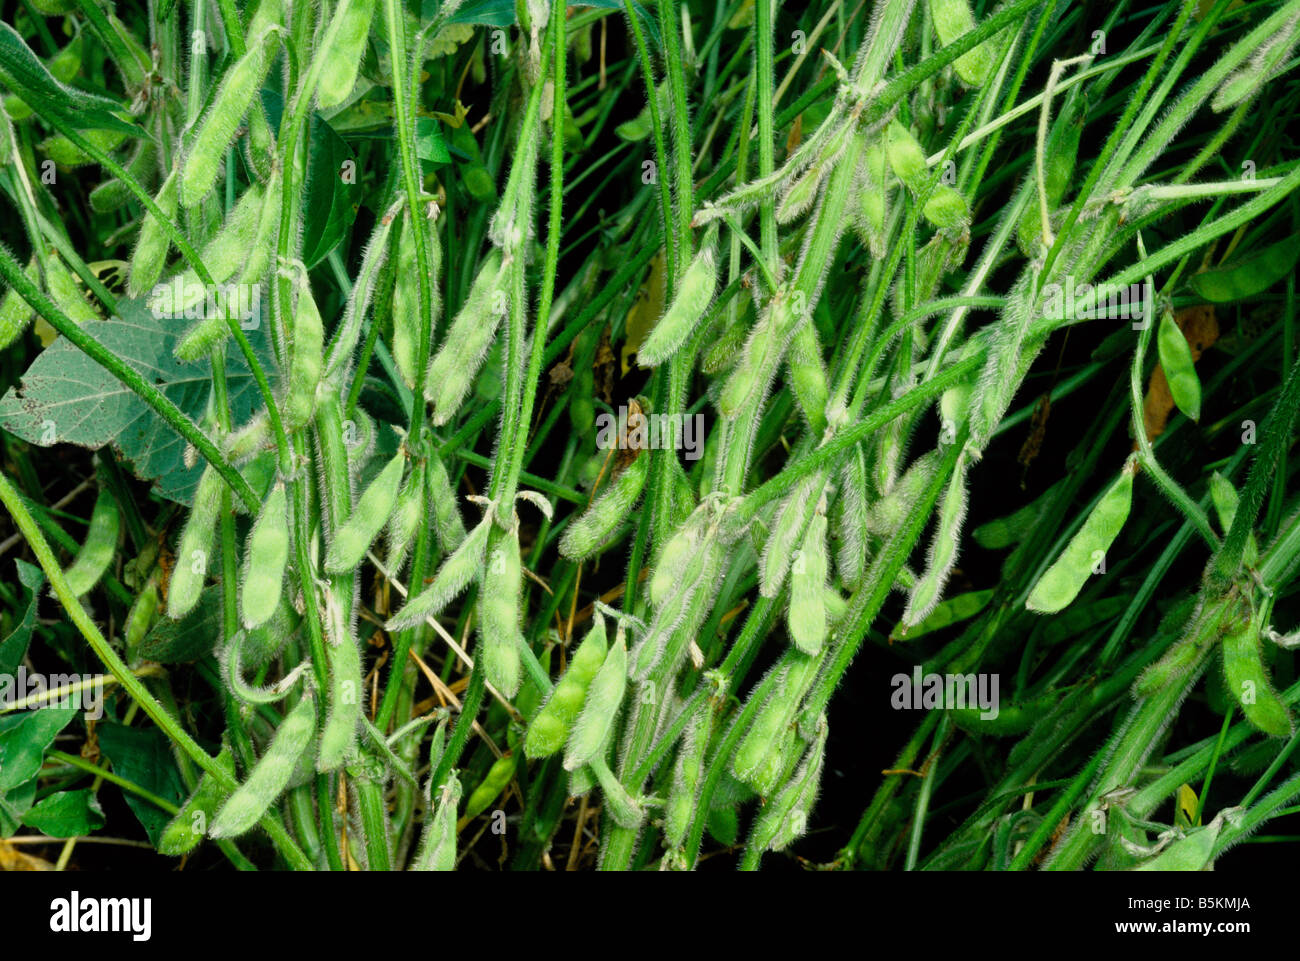 Soybean pods maturing on plant. Stock Photo